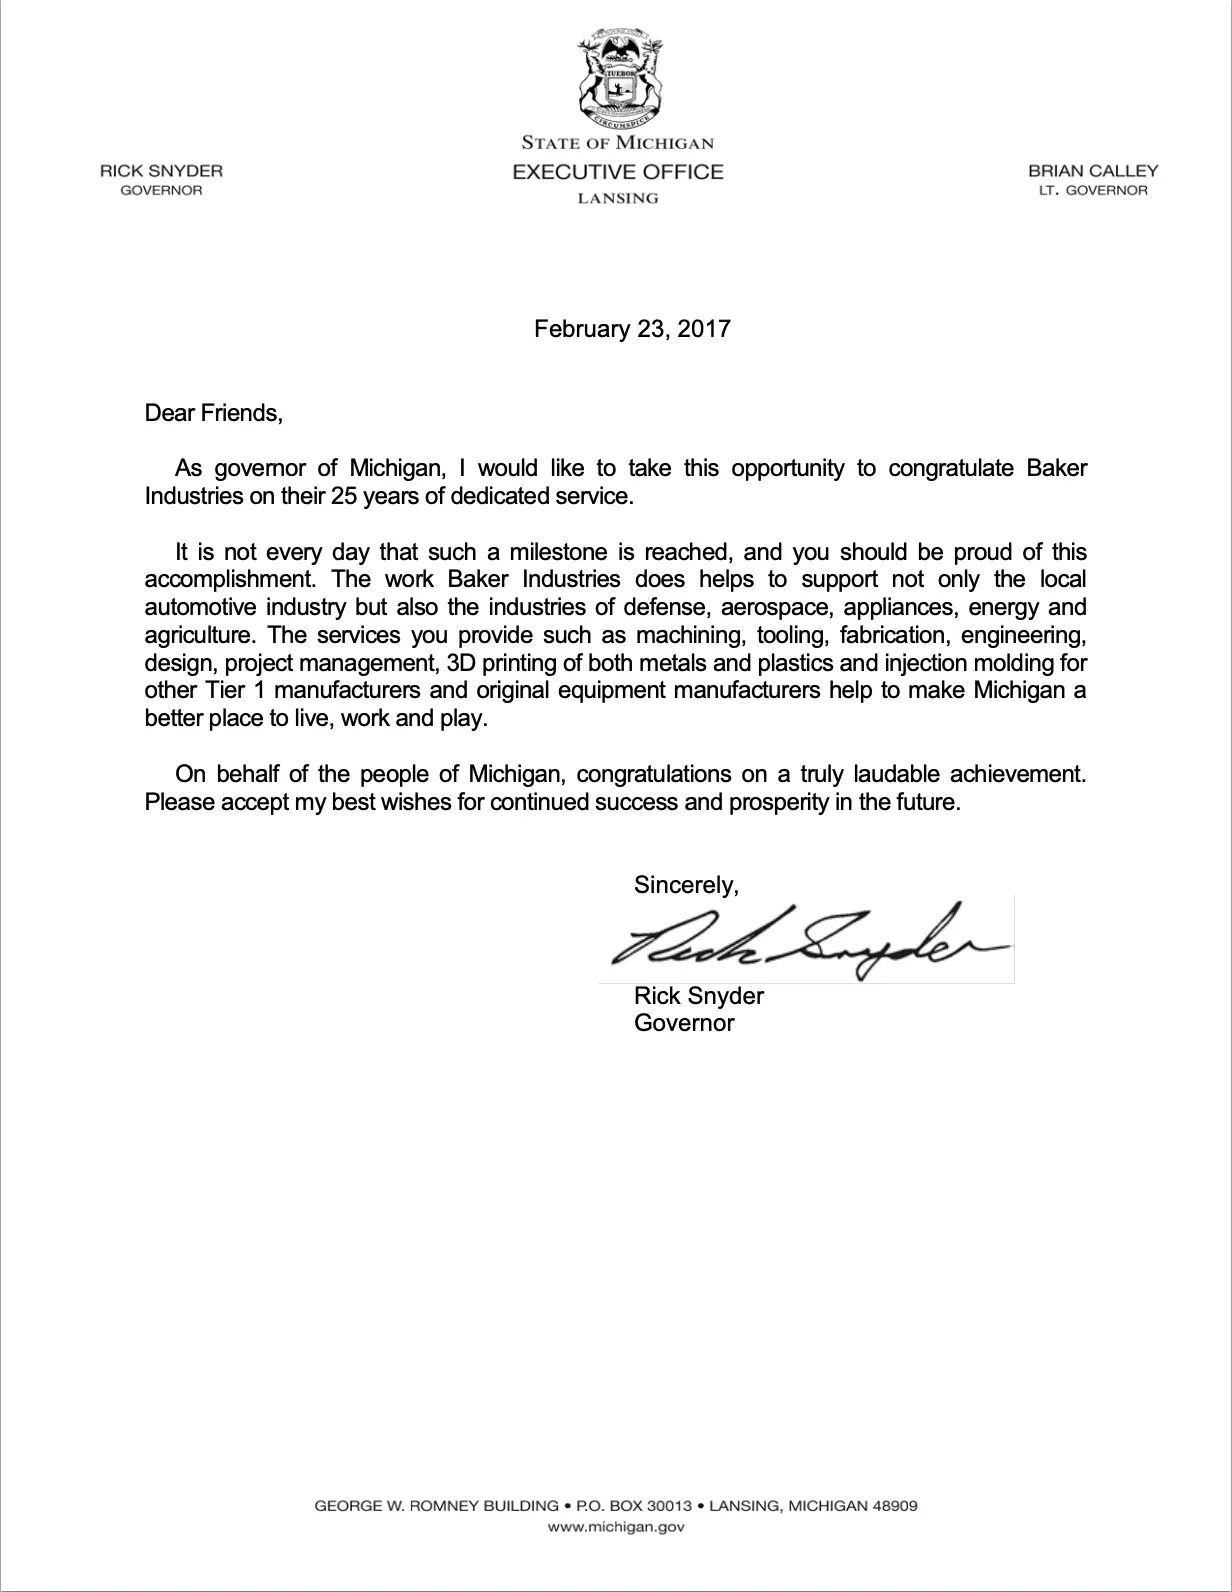 Letter from Michigan Governor Rick Snyder to Baker Industries congratulating them on 25 years of business